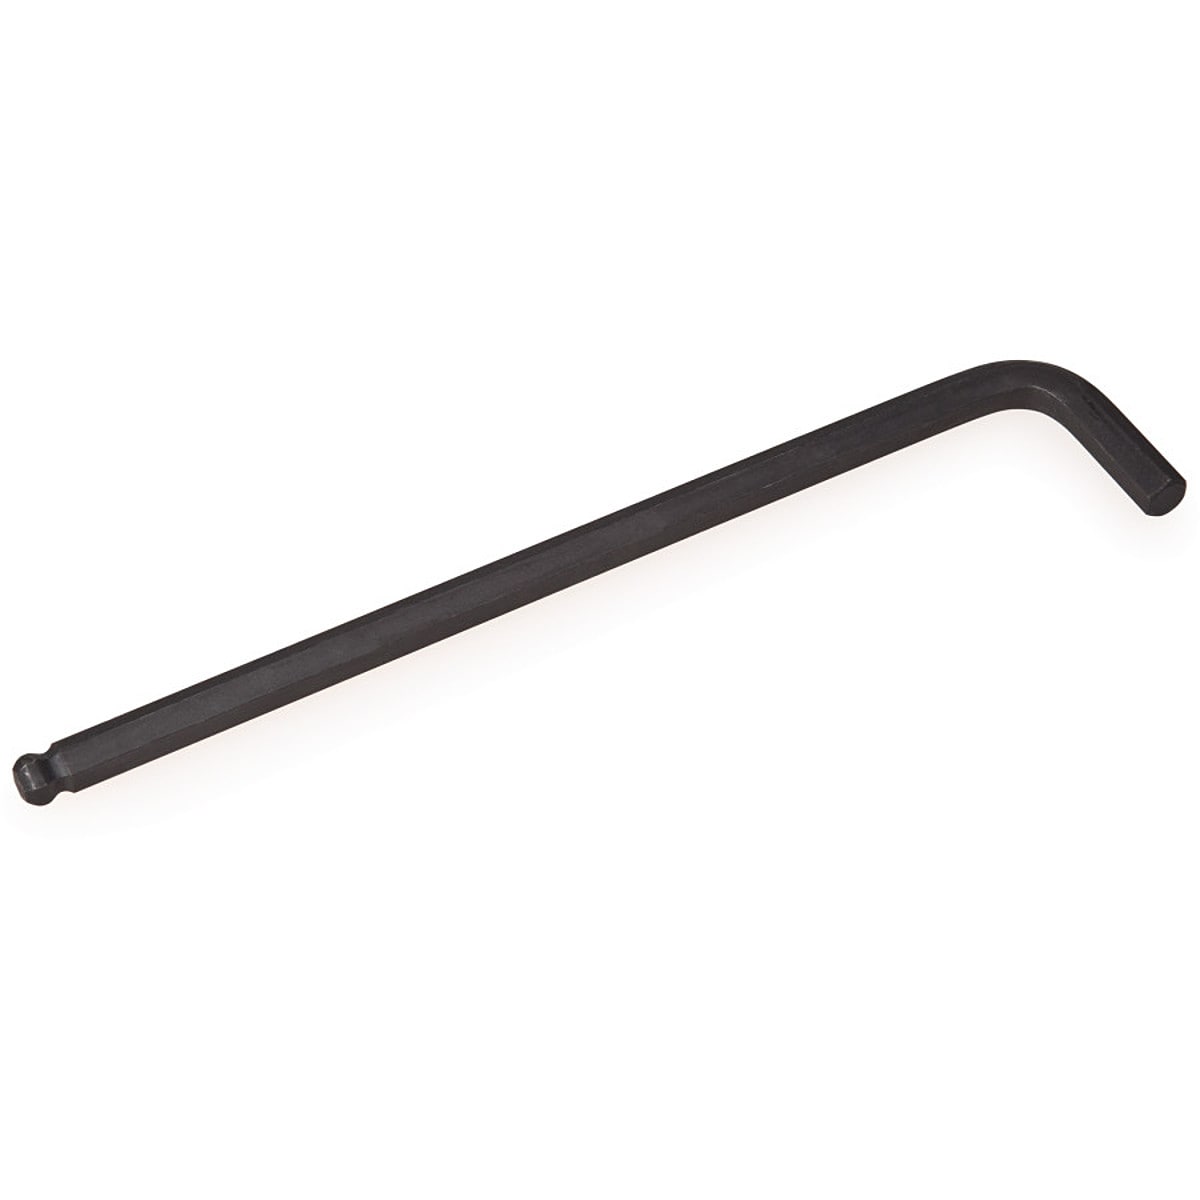 Park Tool 8mm HR-8 Hex Wrench